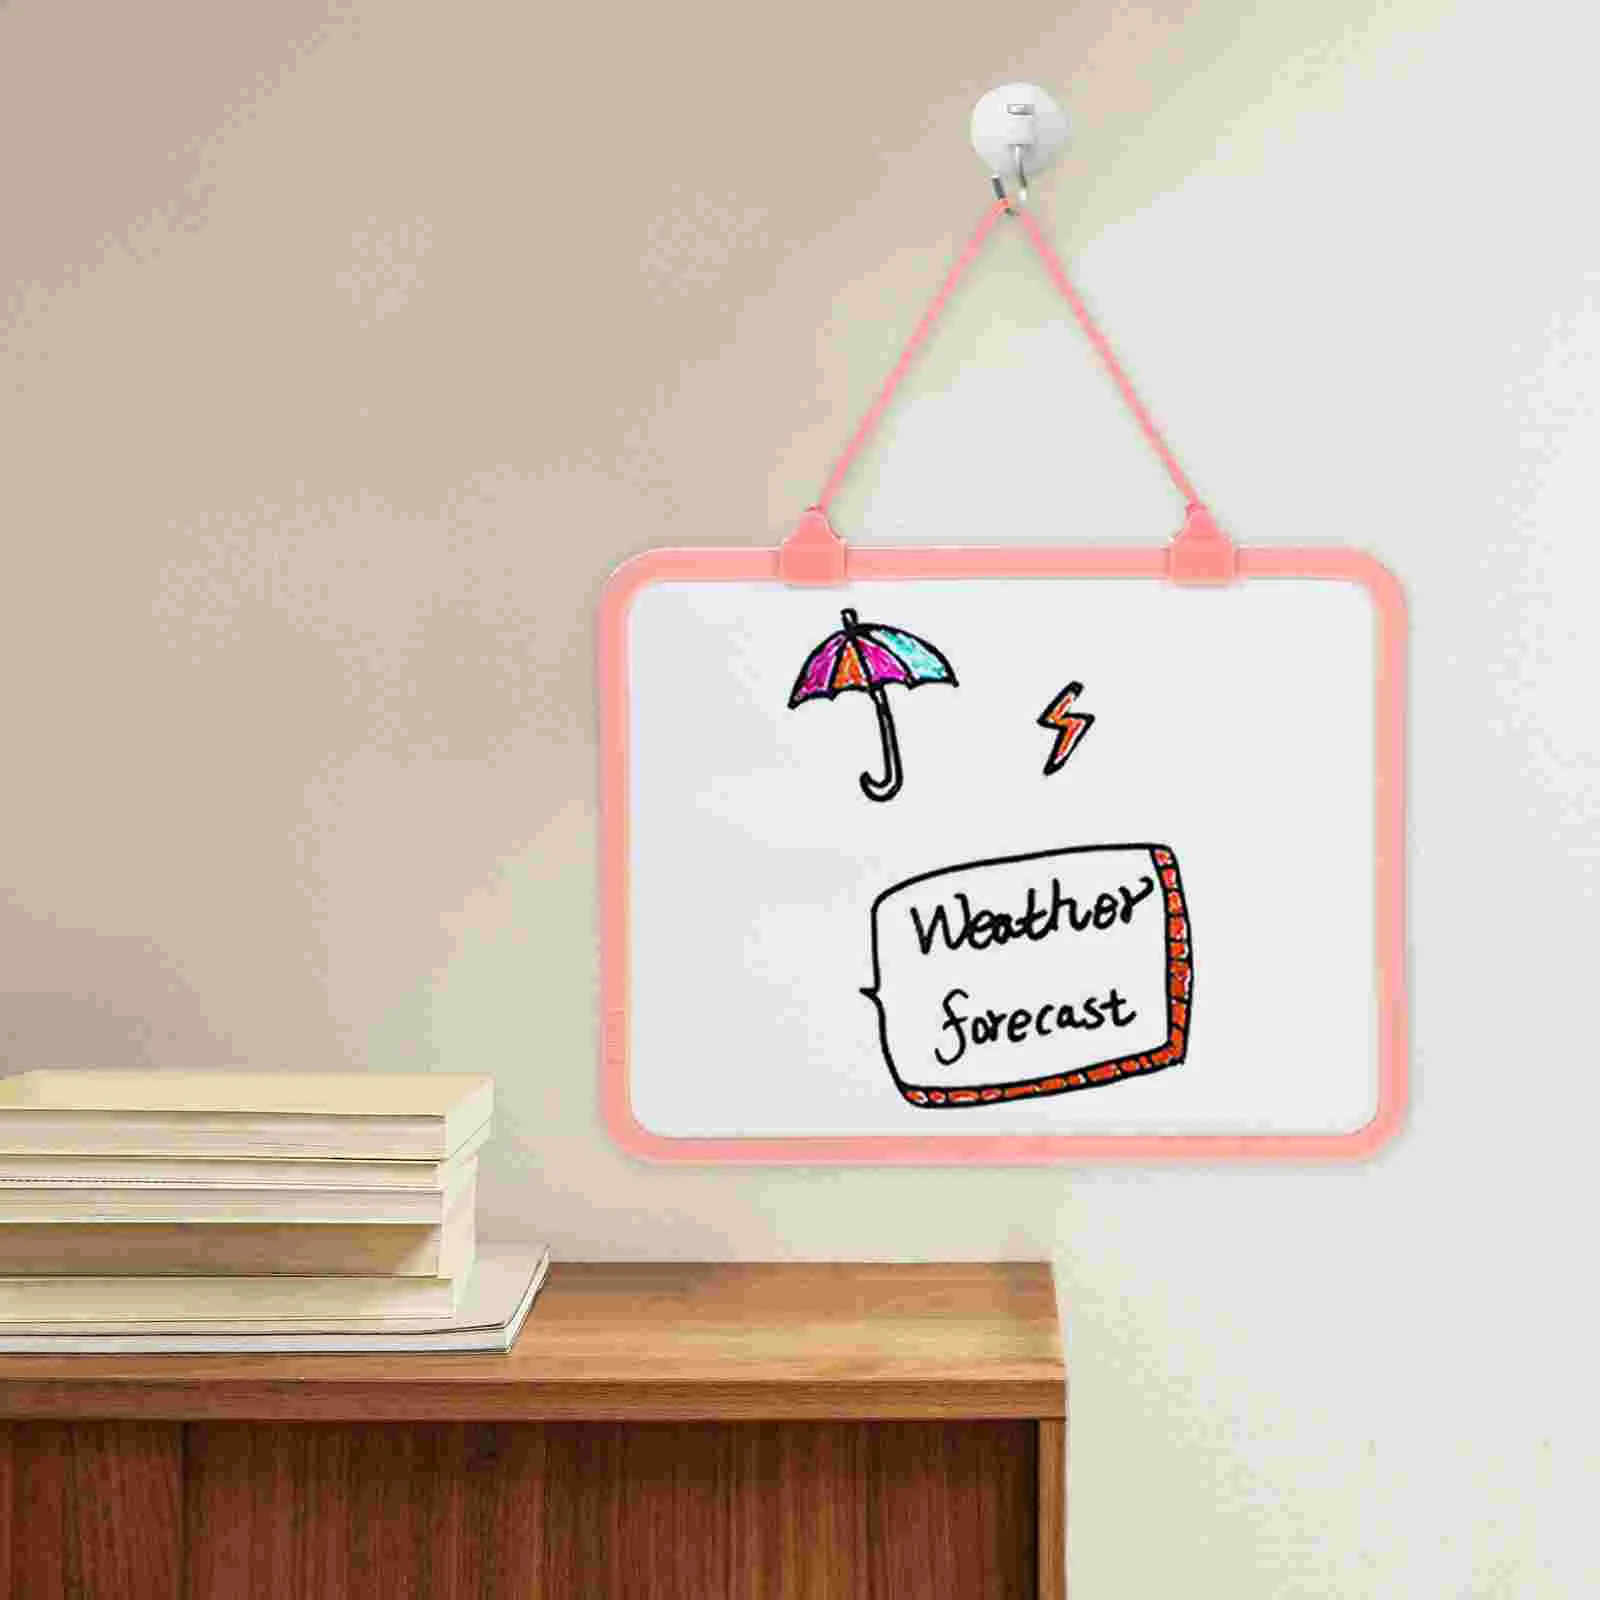 Hanging Whiteboard for Refrigerator Lanyard Memo Dry Erase Plastic Office Message magnetic whiteboard for fridge dry erase boards office graffiti adhesive refrigerator plastic message child